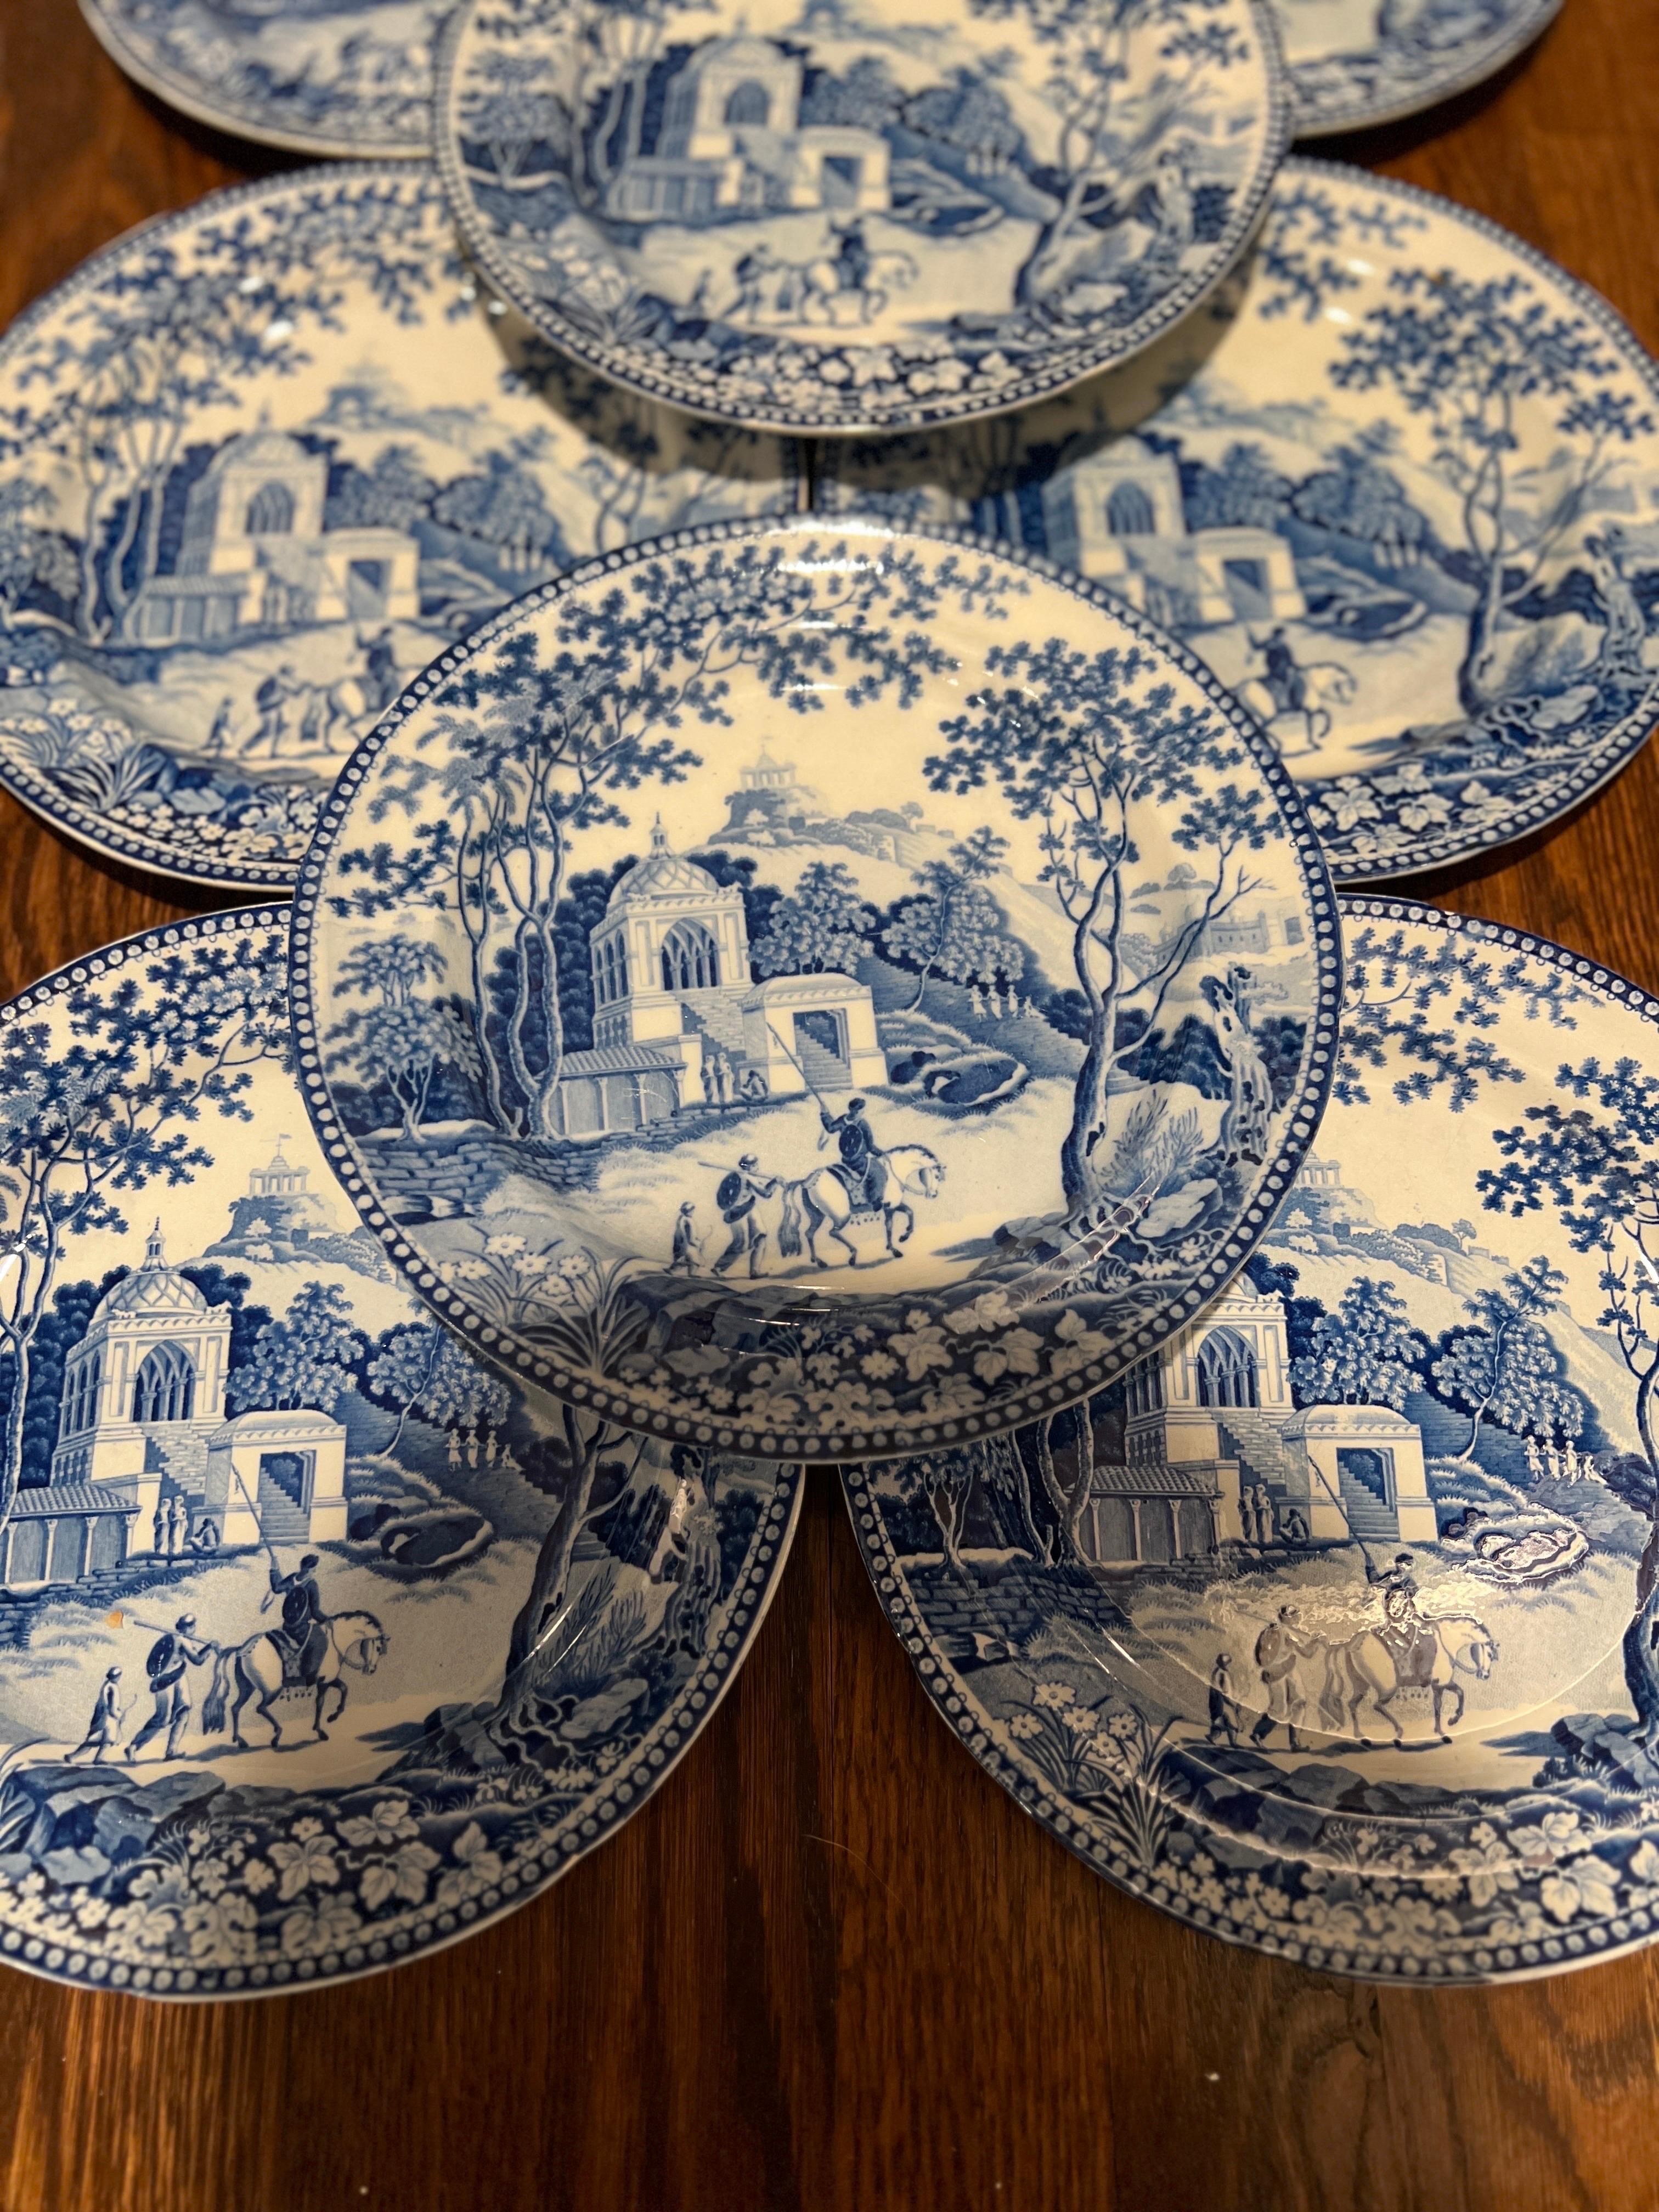 John Rogers & Sons Factory (English, 1795-1830), circa 1820. 

A set of 8 Georgian pearlware dinner plates in the Staffordshire blue and white transfer pattern of 